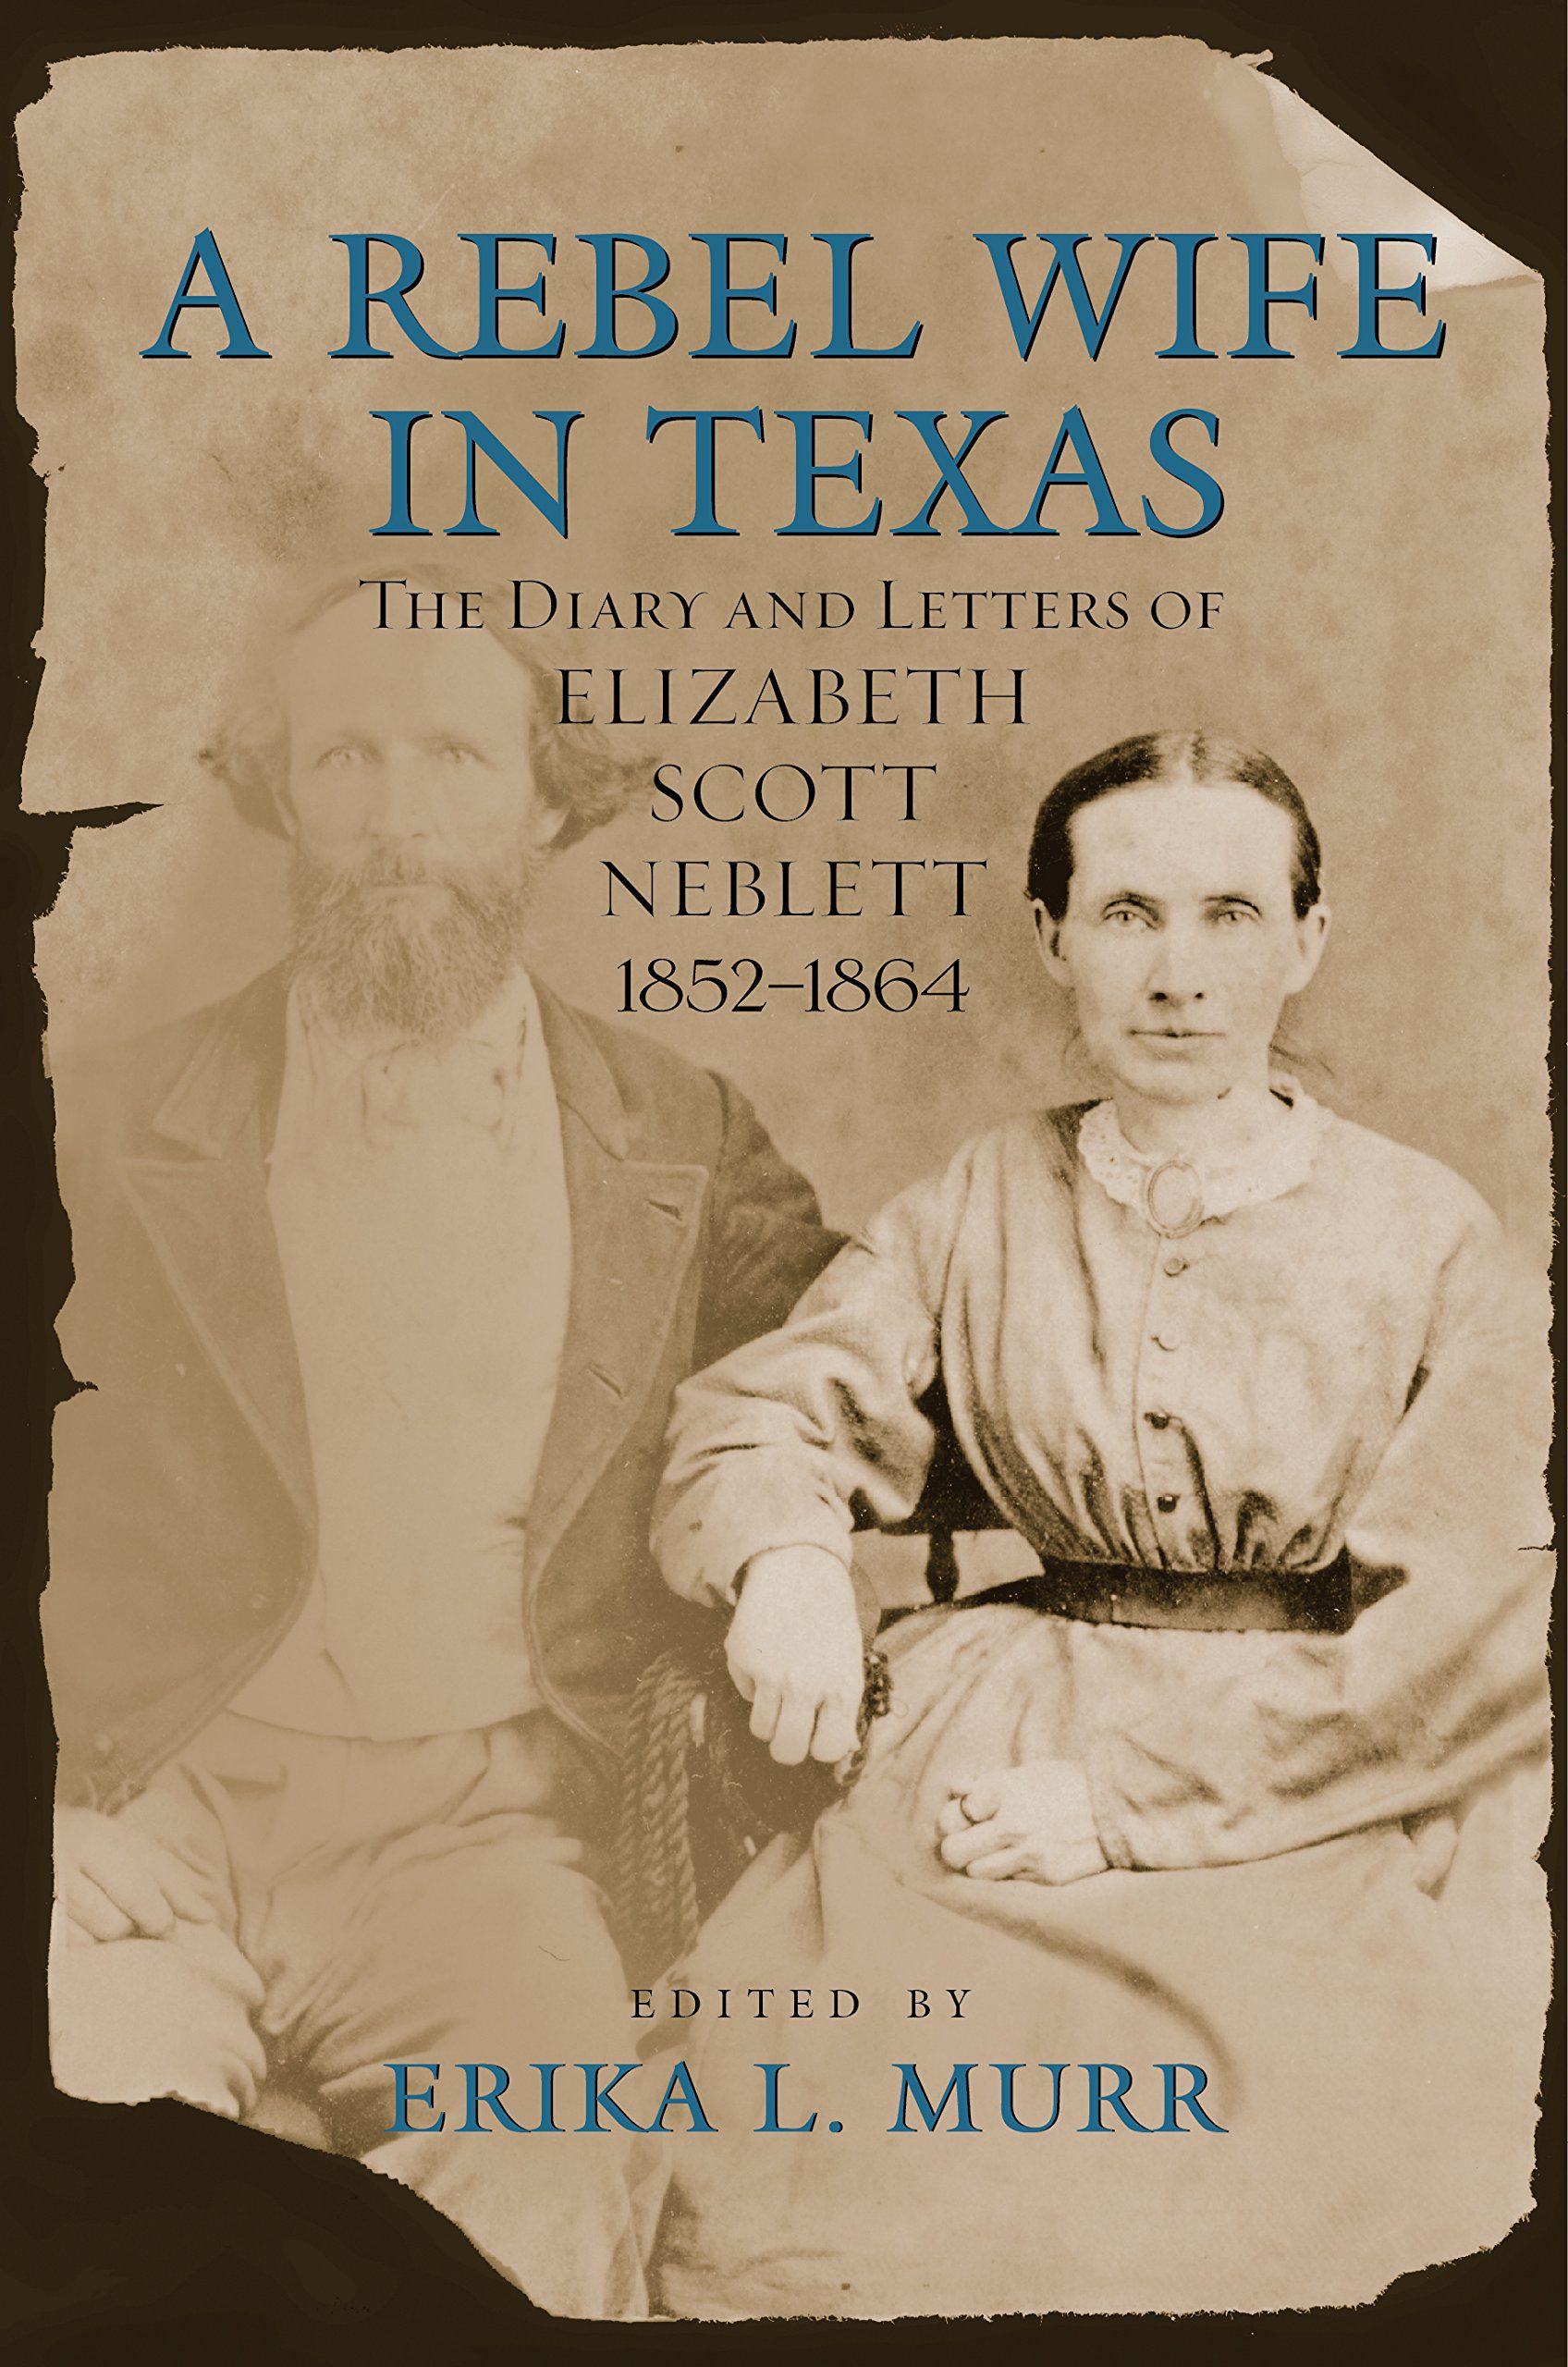 Book cover of A Rebel Wife in Texas: The Diary and Letters of Elizabeth Scott Neblett, 1852-1864 edited by Erika L. Murr